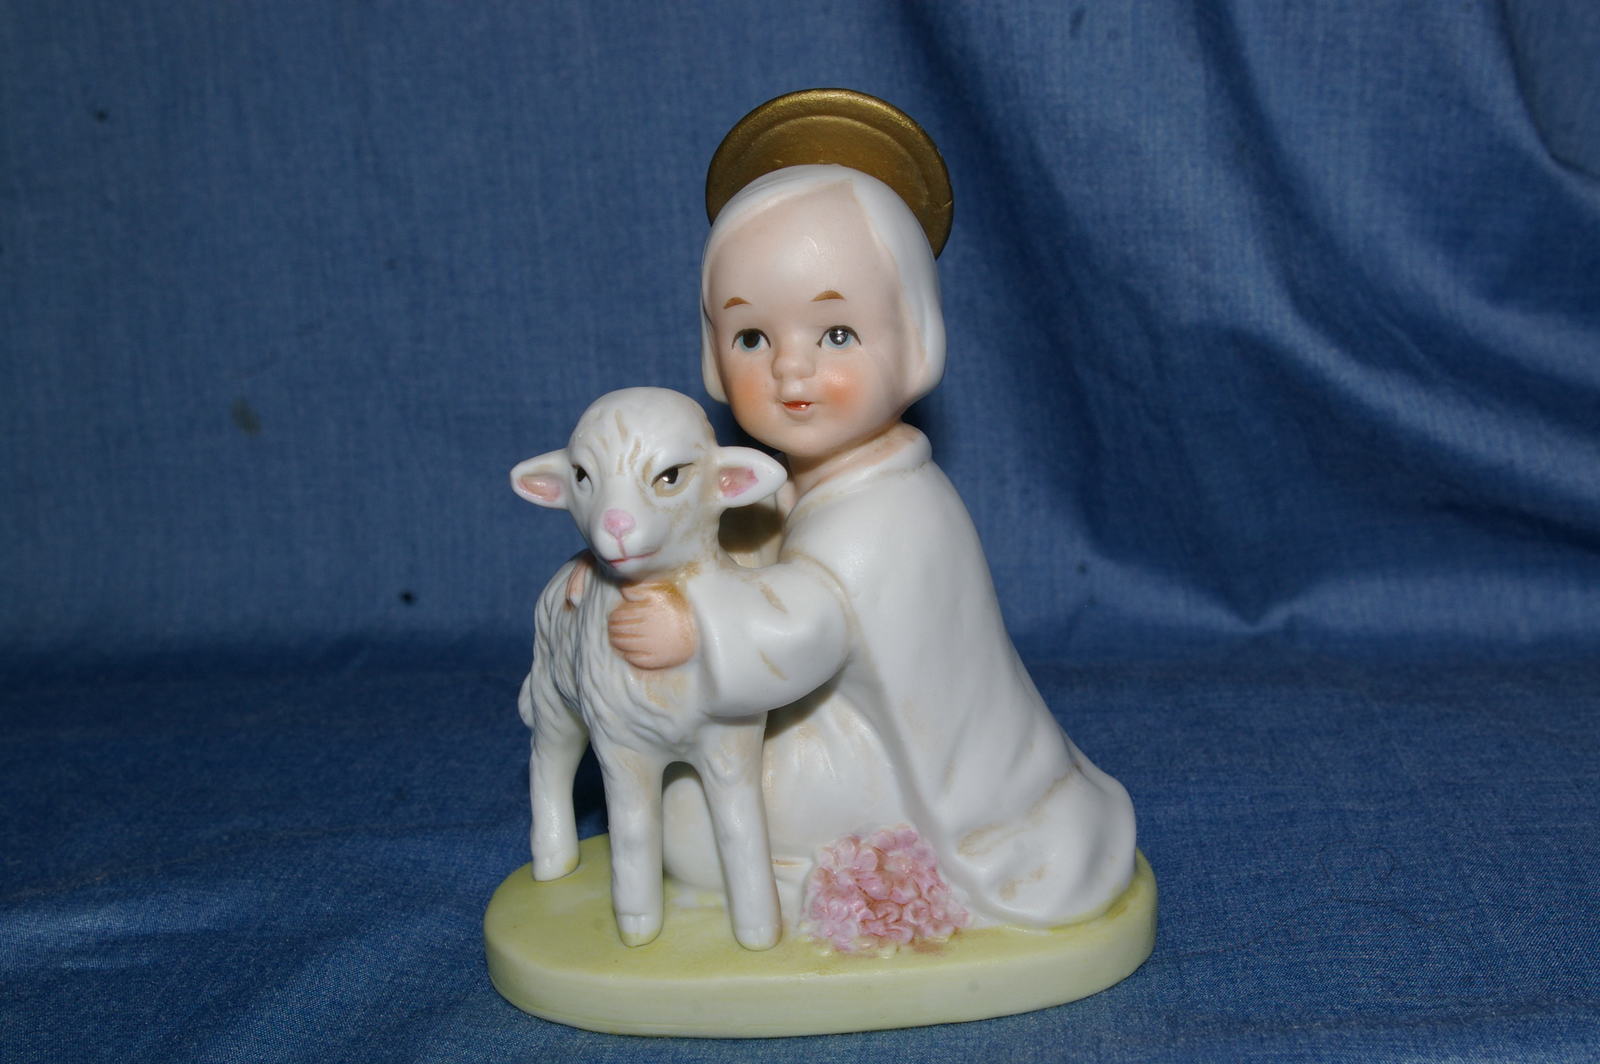 Primary image for Homco Holy Shepherd With Lamb Figurine 5605 Angel Sheep Home Interiors & Gifts-b